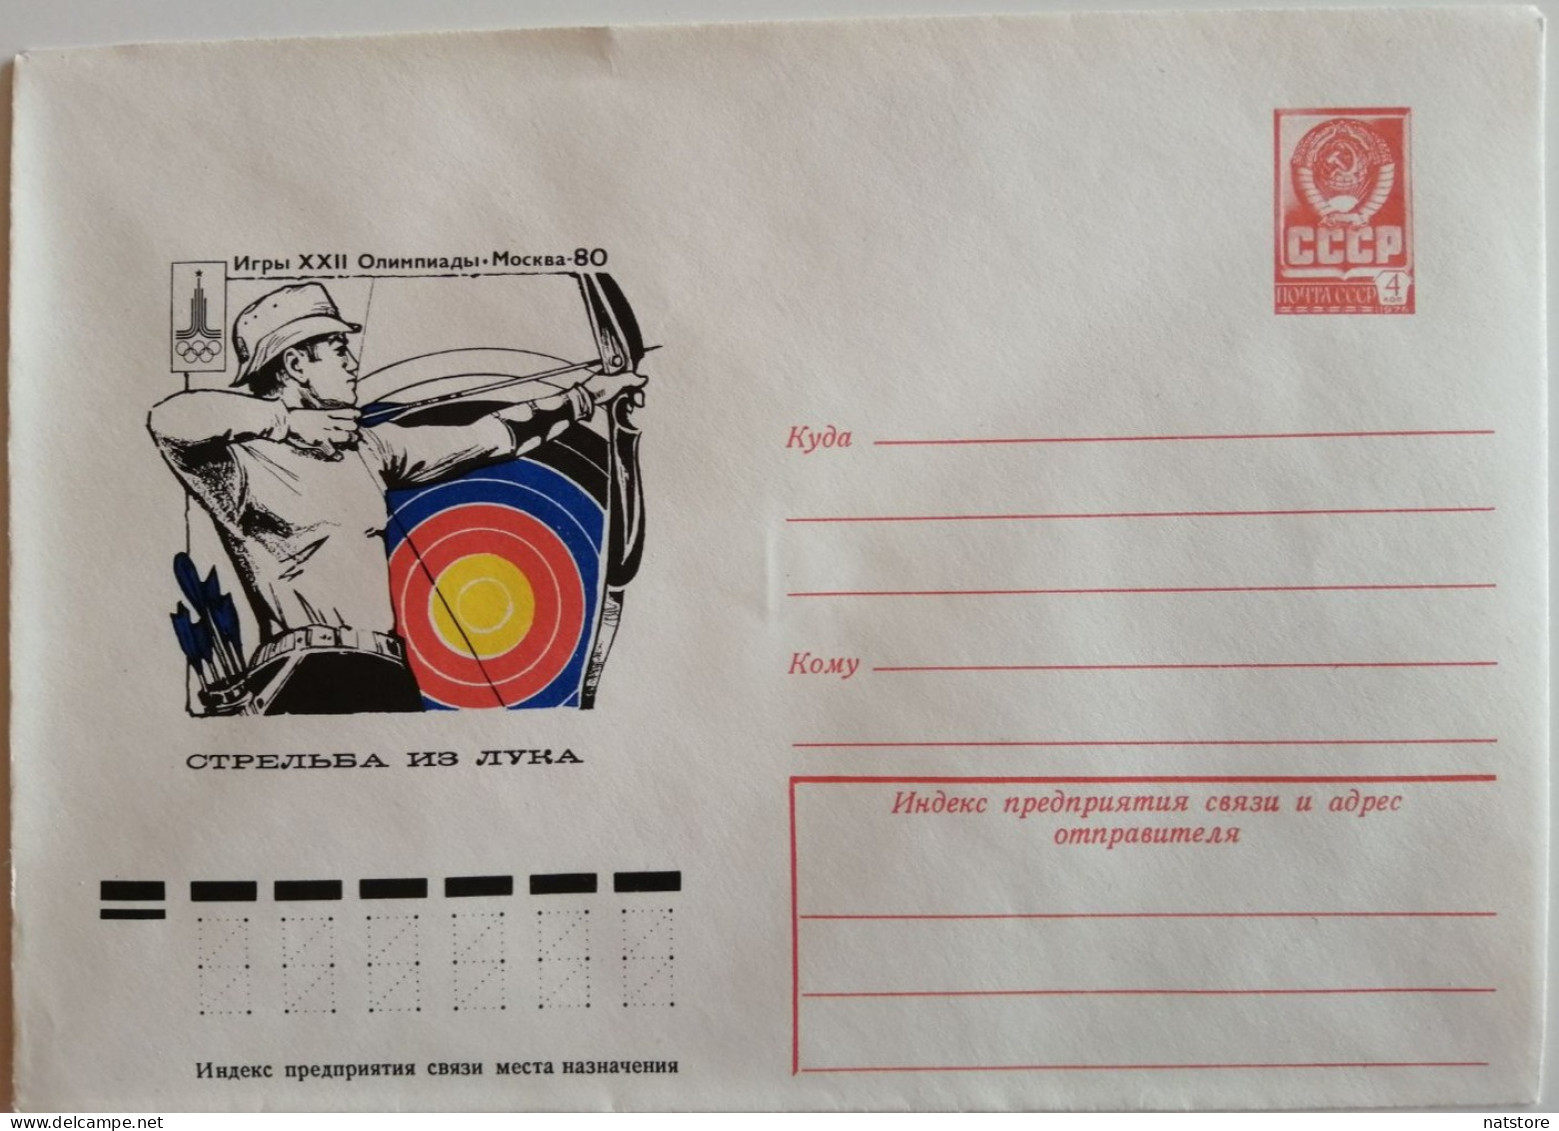 1977..USSR...VINTAGE  COVER WITH STAMP.. ..OLYMPIC GAMES XXII..MOSCOW-80..ARCHERY - Verano 1980: Moscu